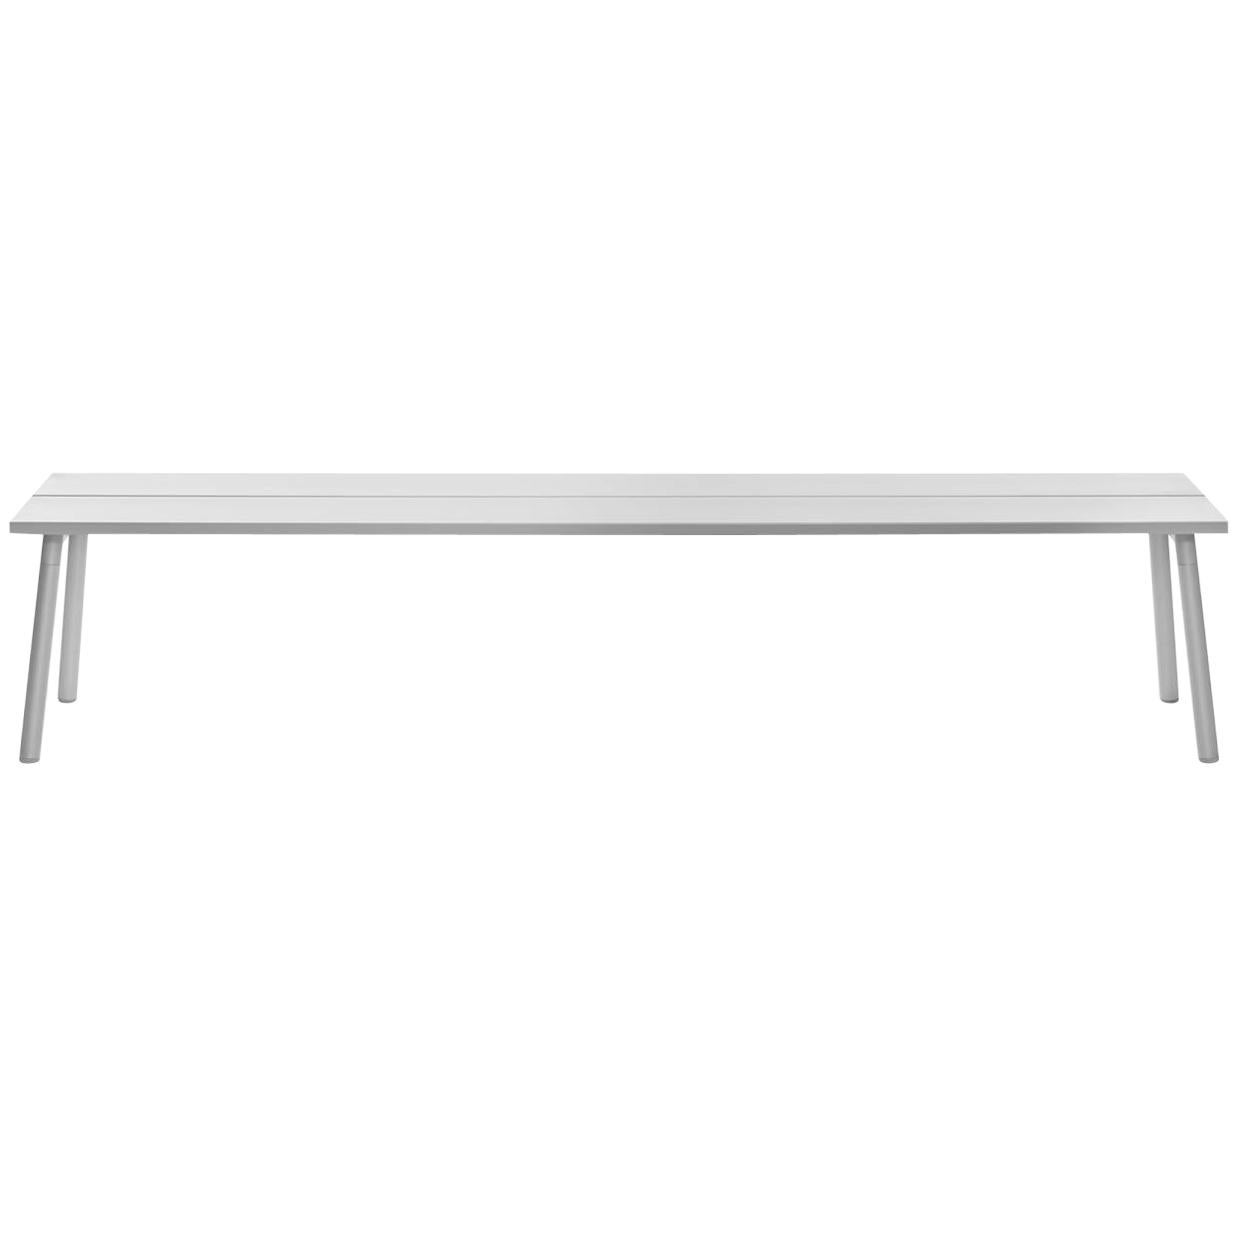 Emeco Run 4-Seat Bench in Clear Adonized Aluminum by Sam Hecht & Kim Colin